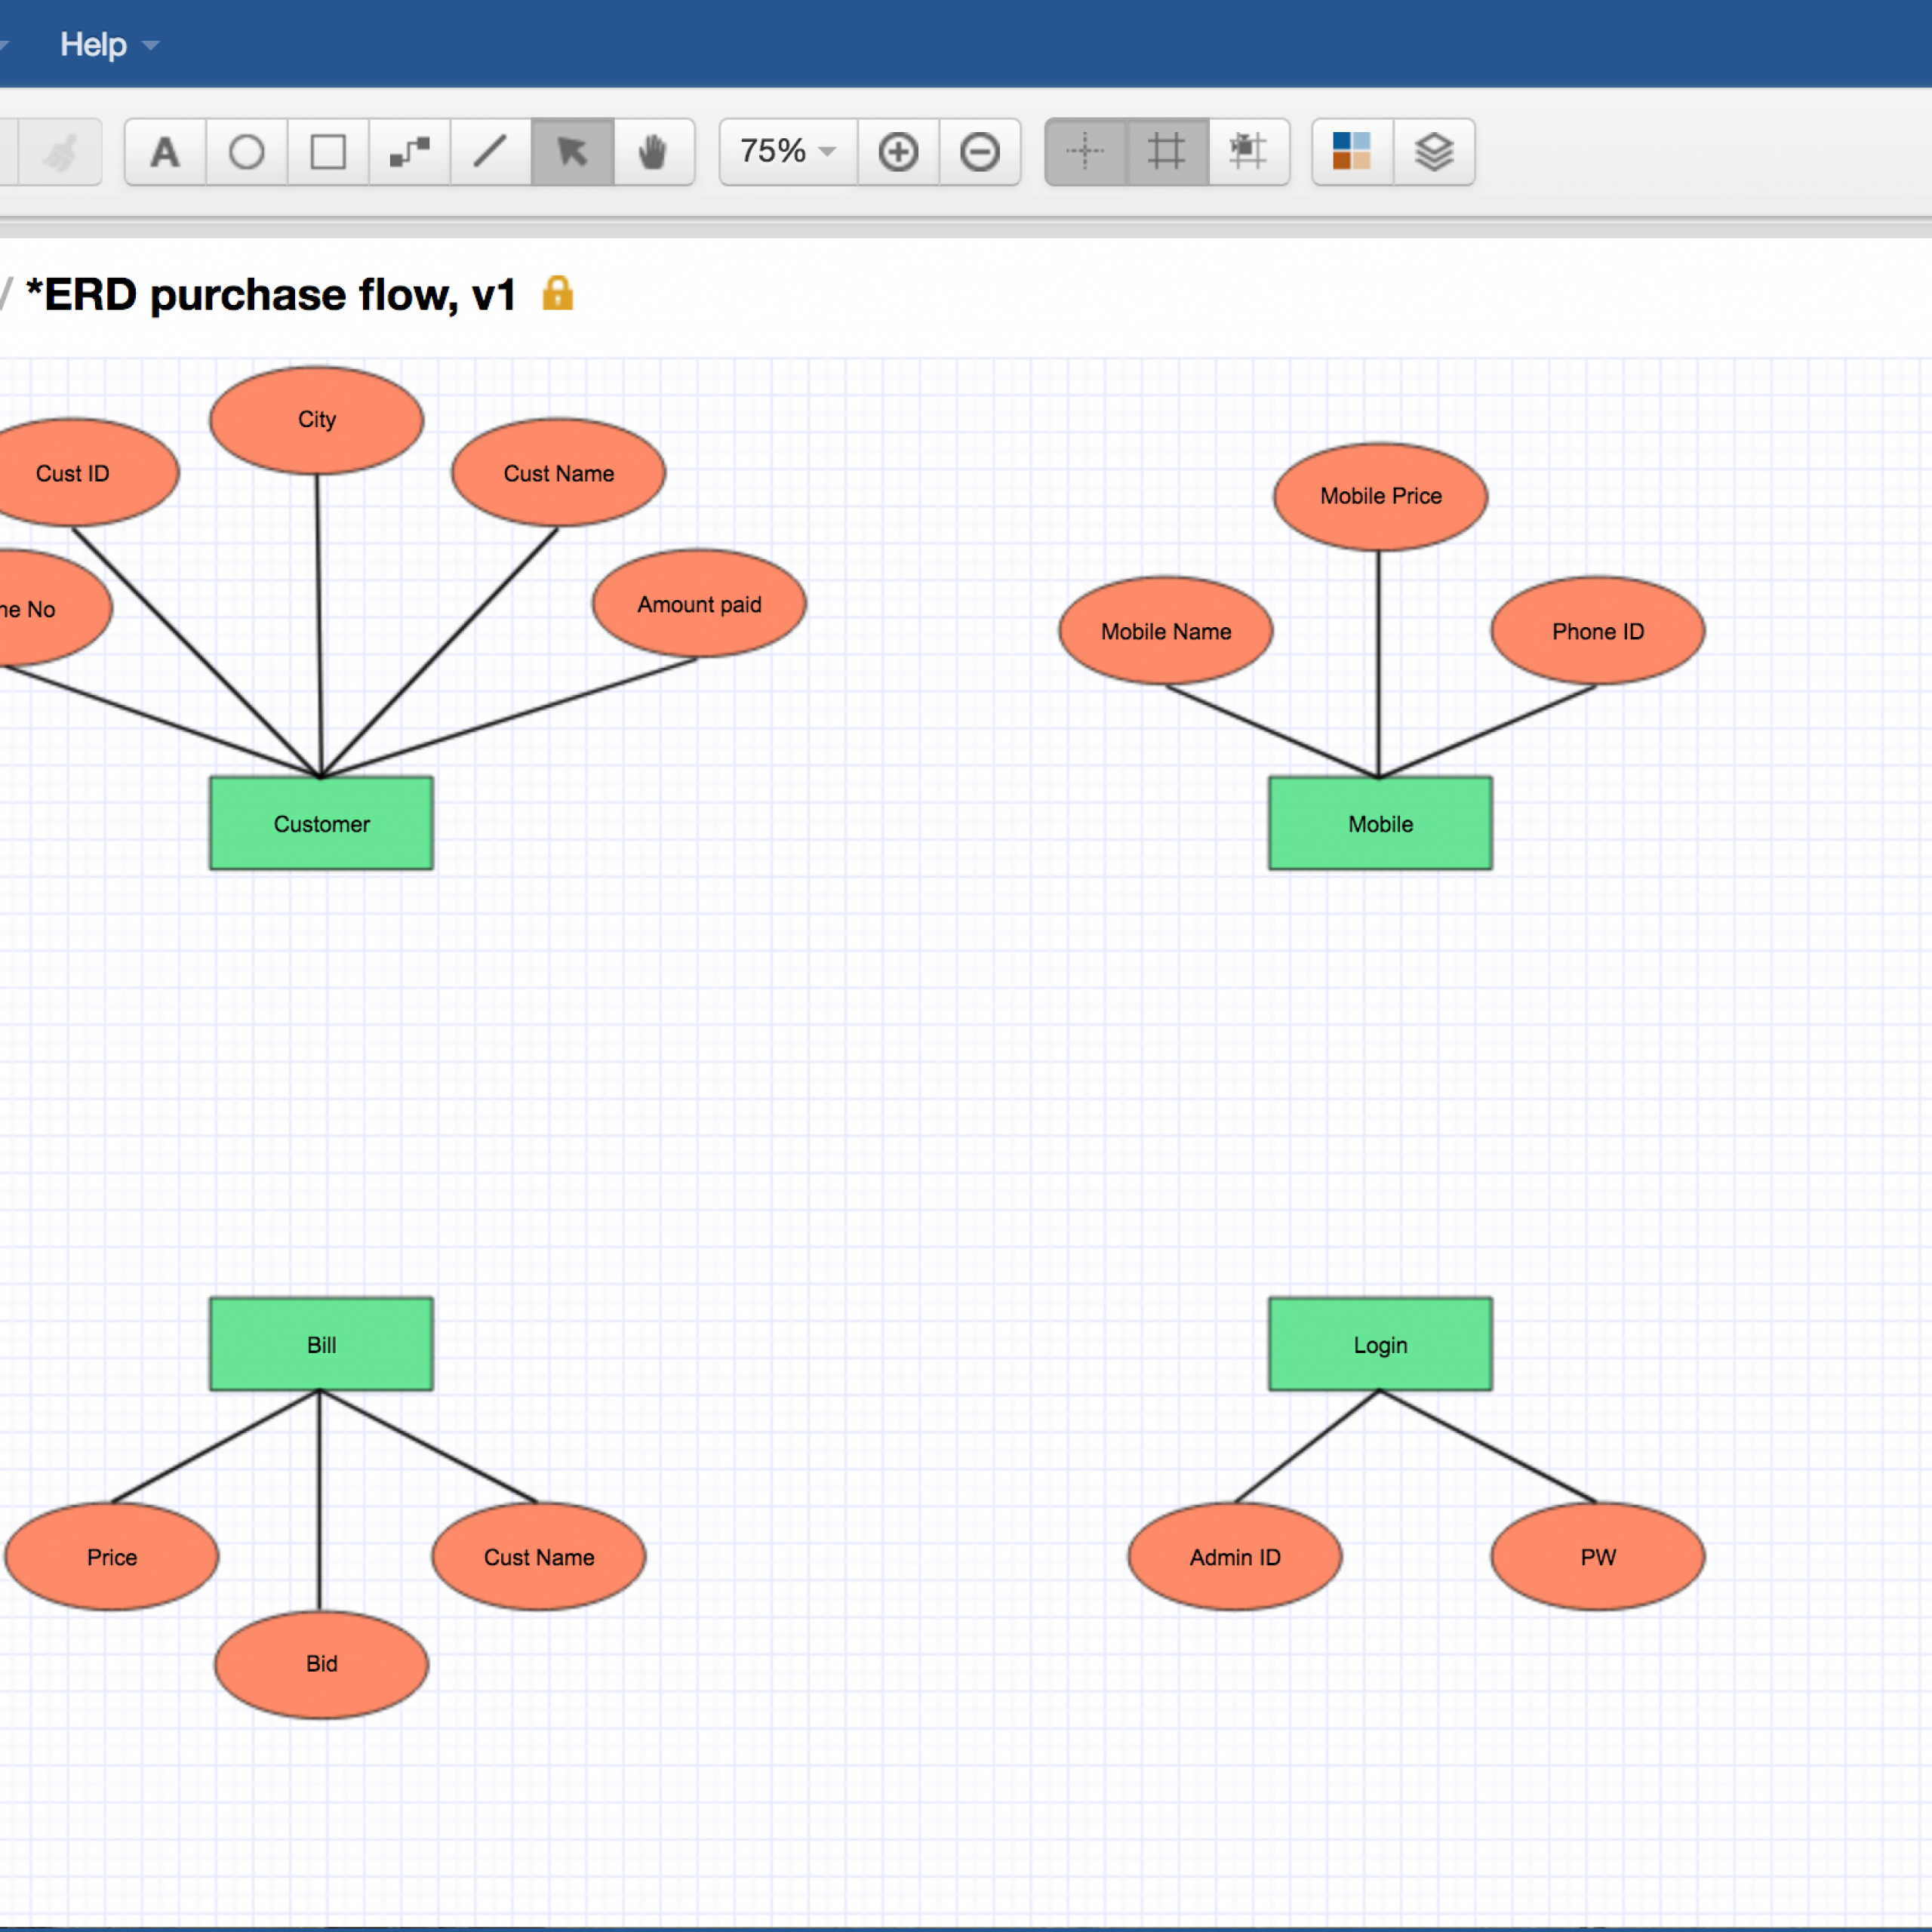 How To Draw An Entity-Relationship Diagram with regard to How To Create Erd Diagram